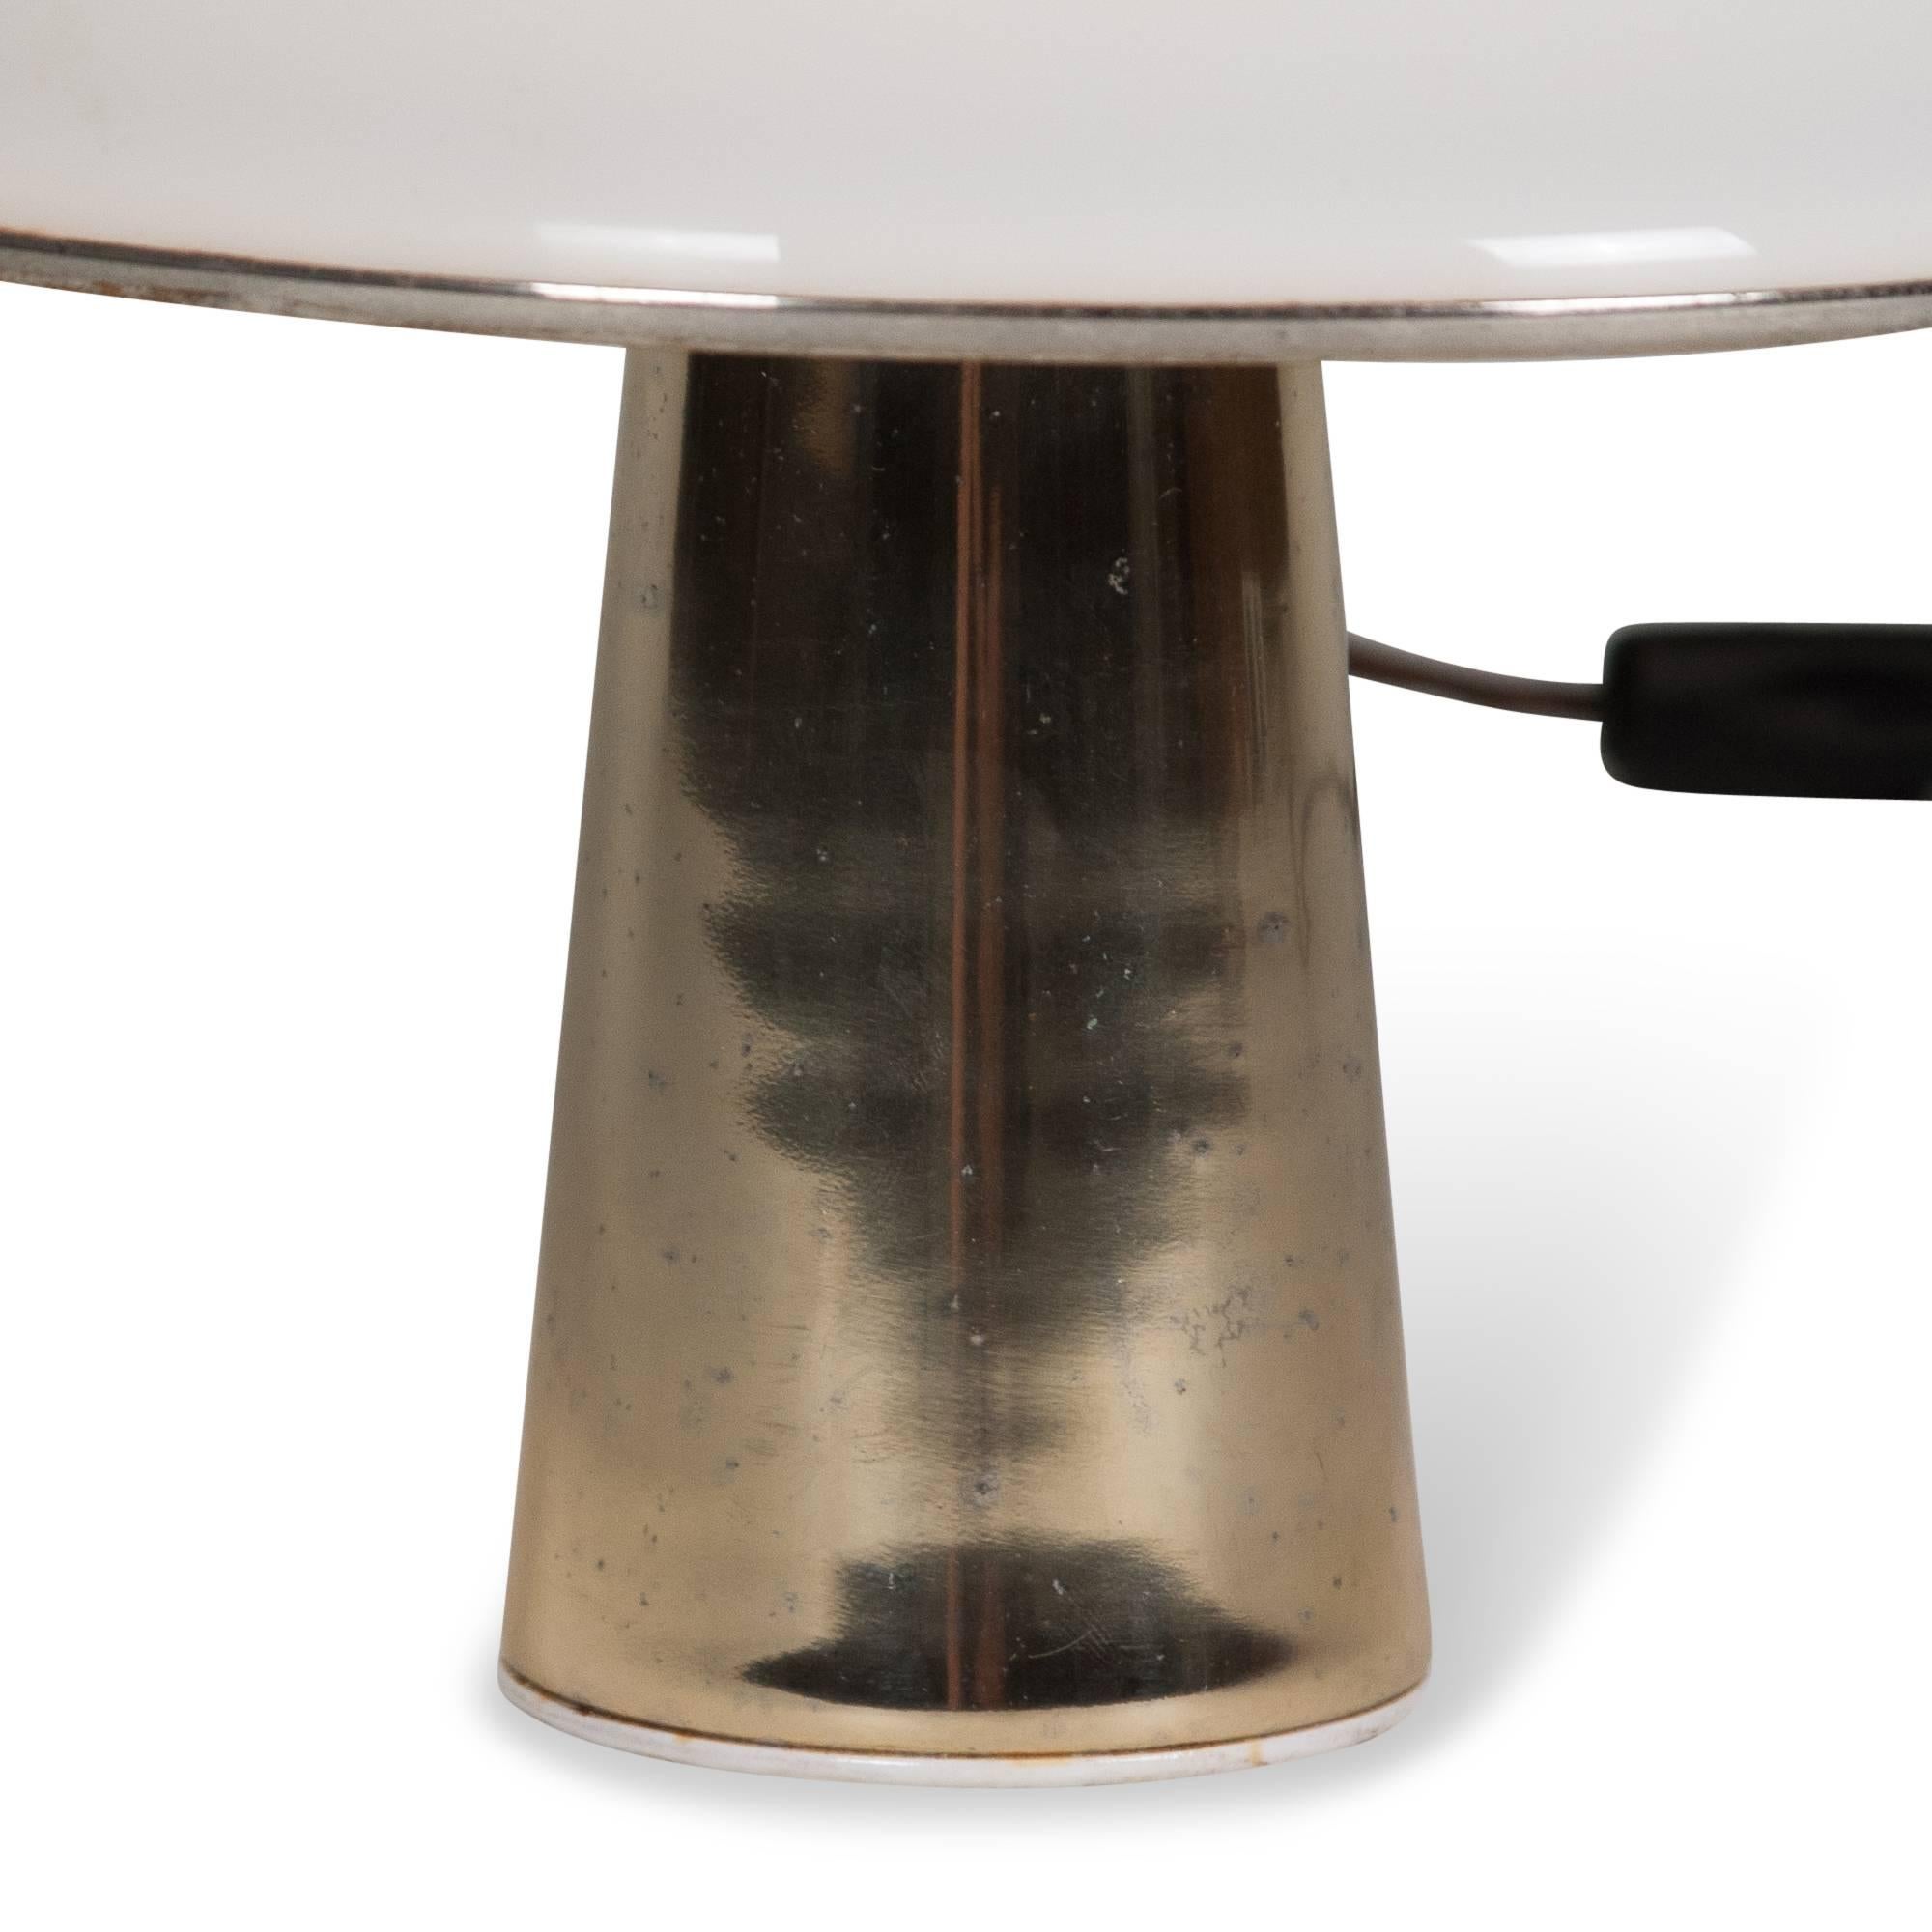 Frosted plexi cone shaped lamp, on slightly tapered lacquered gold tinted metal column base. By Guzzini, Italian, 1970s. Overall height 12 in, diameter of shade 11 1/2 in. (Item #2352).